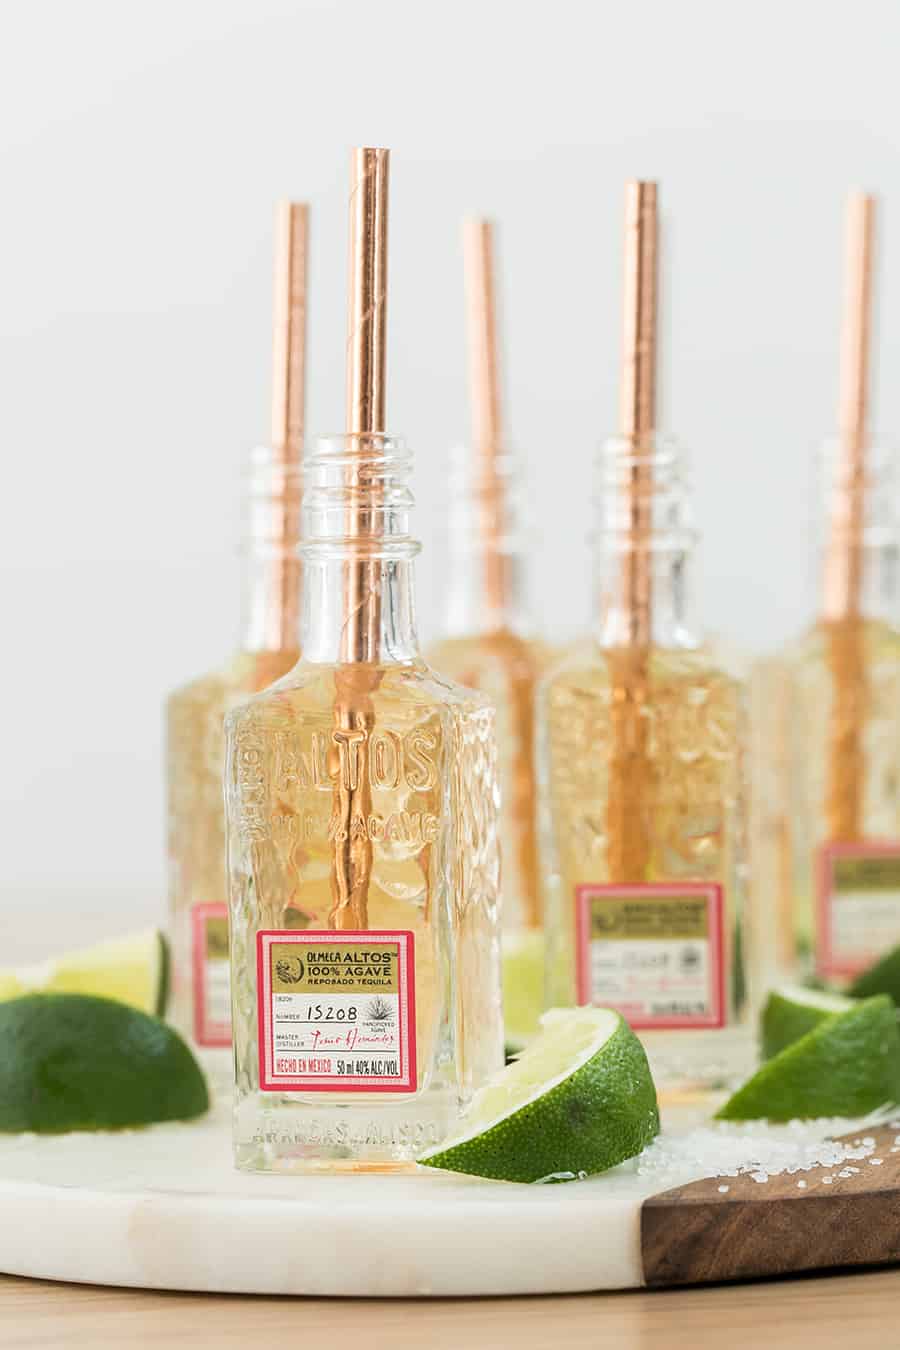 Tiny tequila shots in mini tequila bottles with a copper straw and a lime wedge.